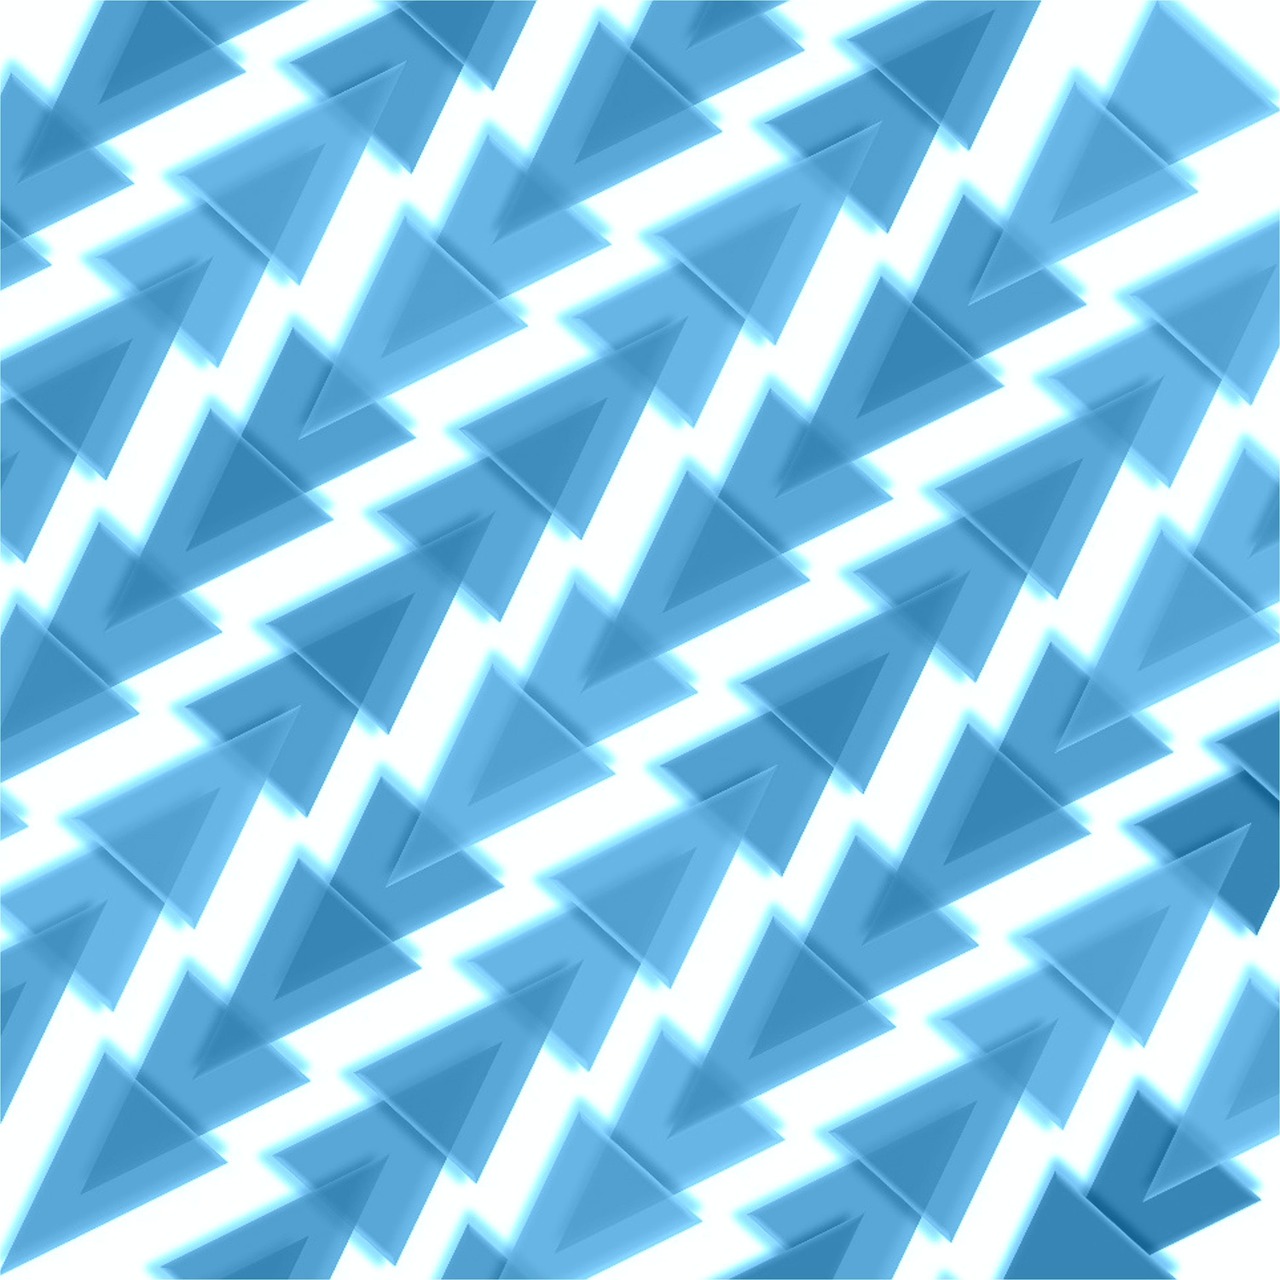 a close up of a blue and white pattern, tumblr, abstract illusionism, flat triangles, no gradients, background with neon lighting, on white background